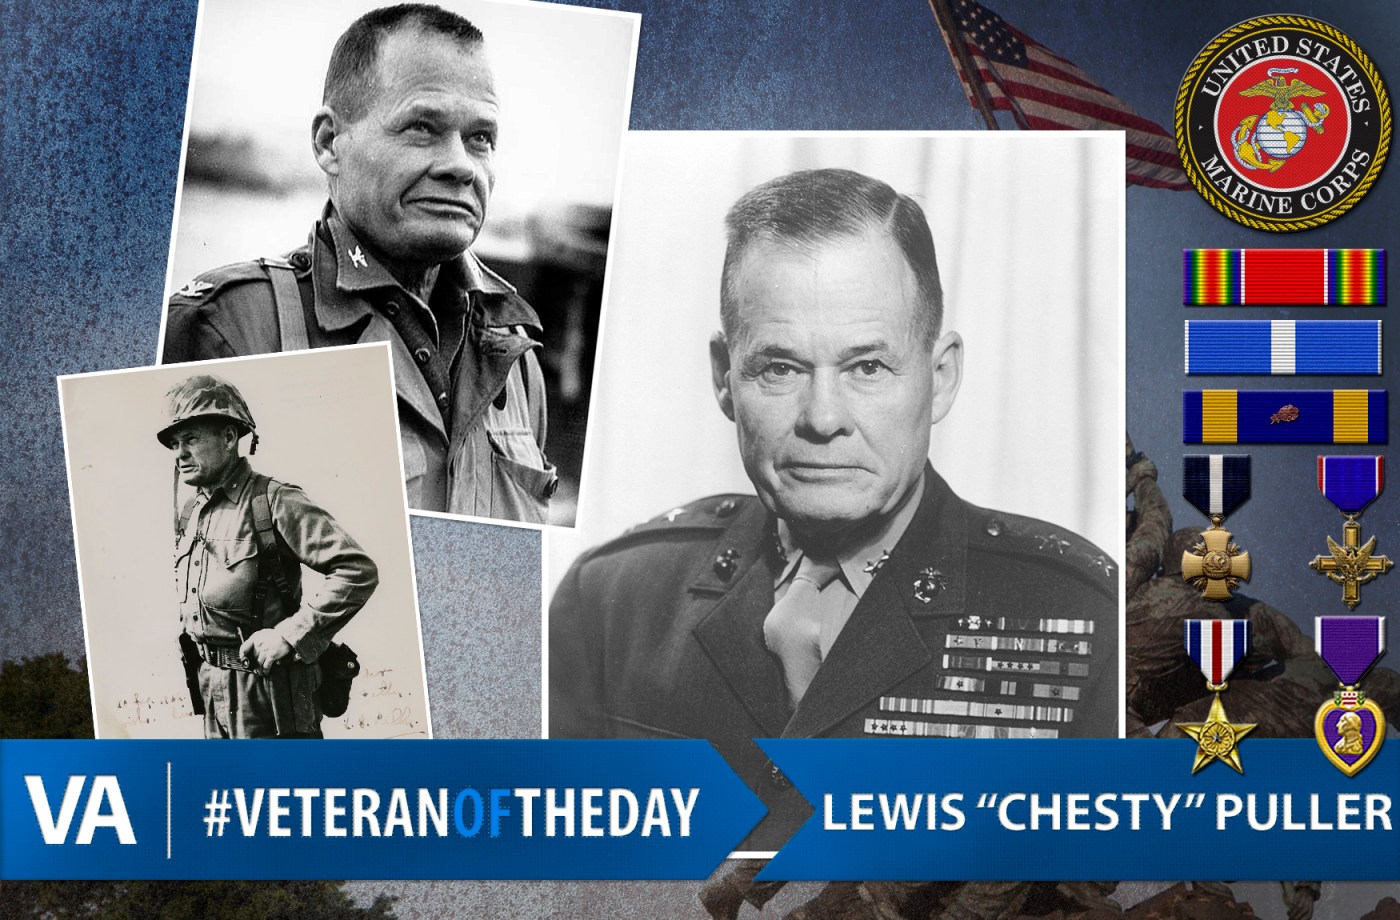 #VeteranOfTheDay New Years Day 2016 – Lewis “Chesty” Puller